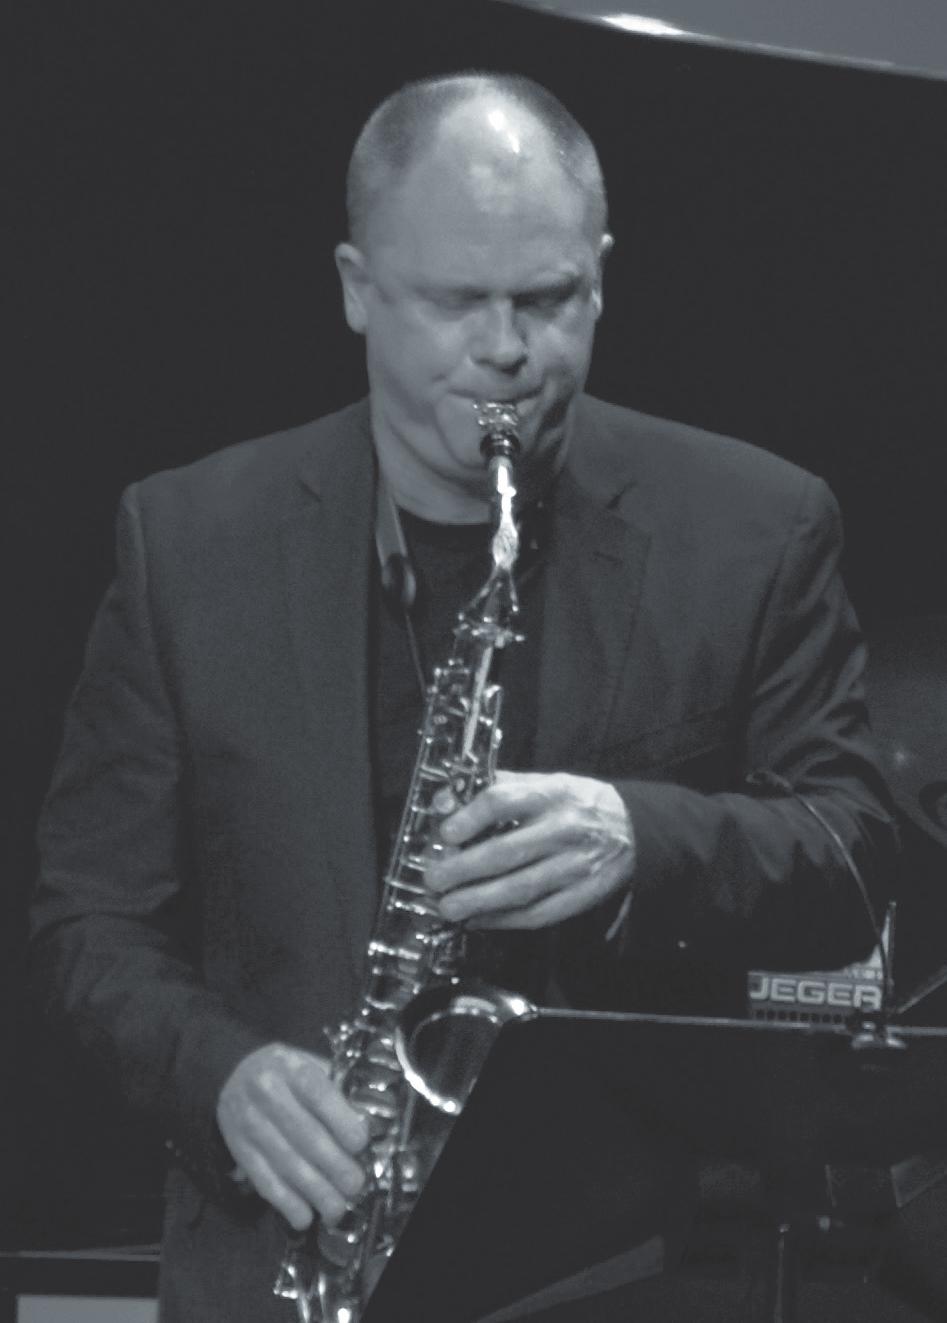 Skelton has performed and/or soloed with The London Symphony Orchestra, The Atlanta Symphony, The Atlanta Pops, The Peachtree Pops, The Atlanta Ballet Orchestra and The Cobb Symphony Orchestra as